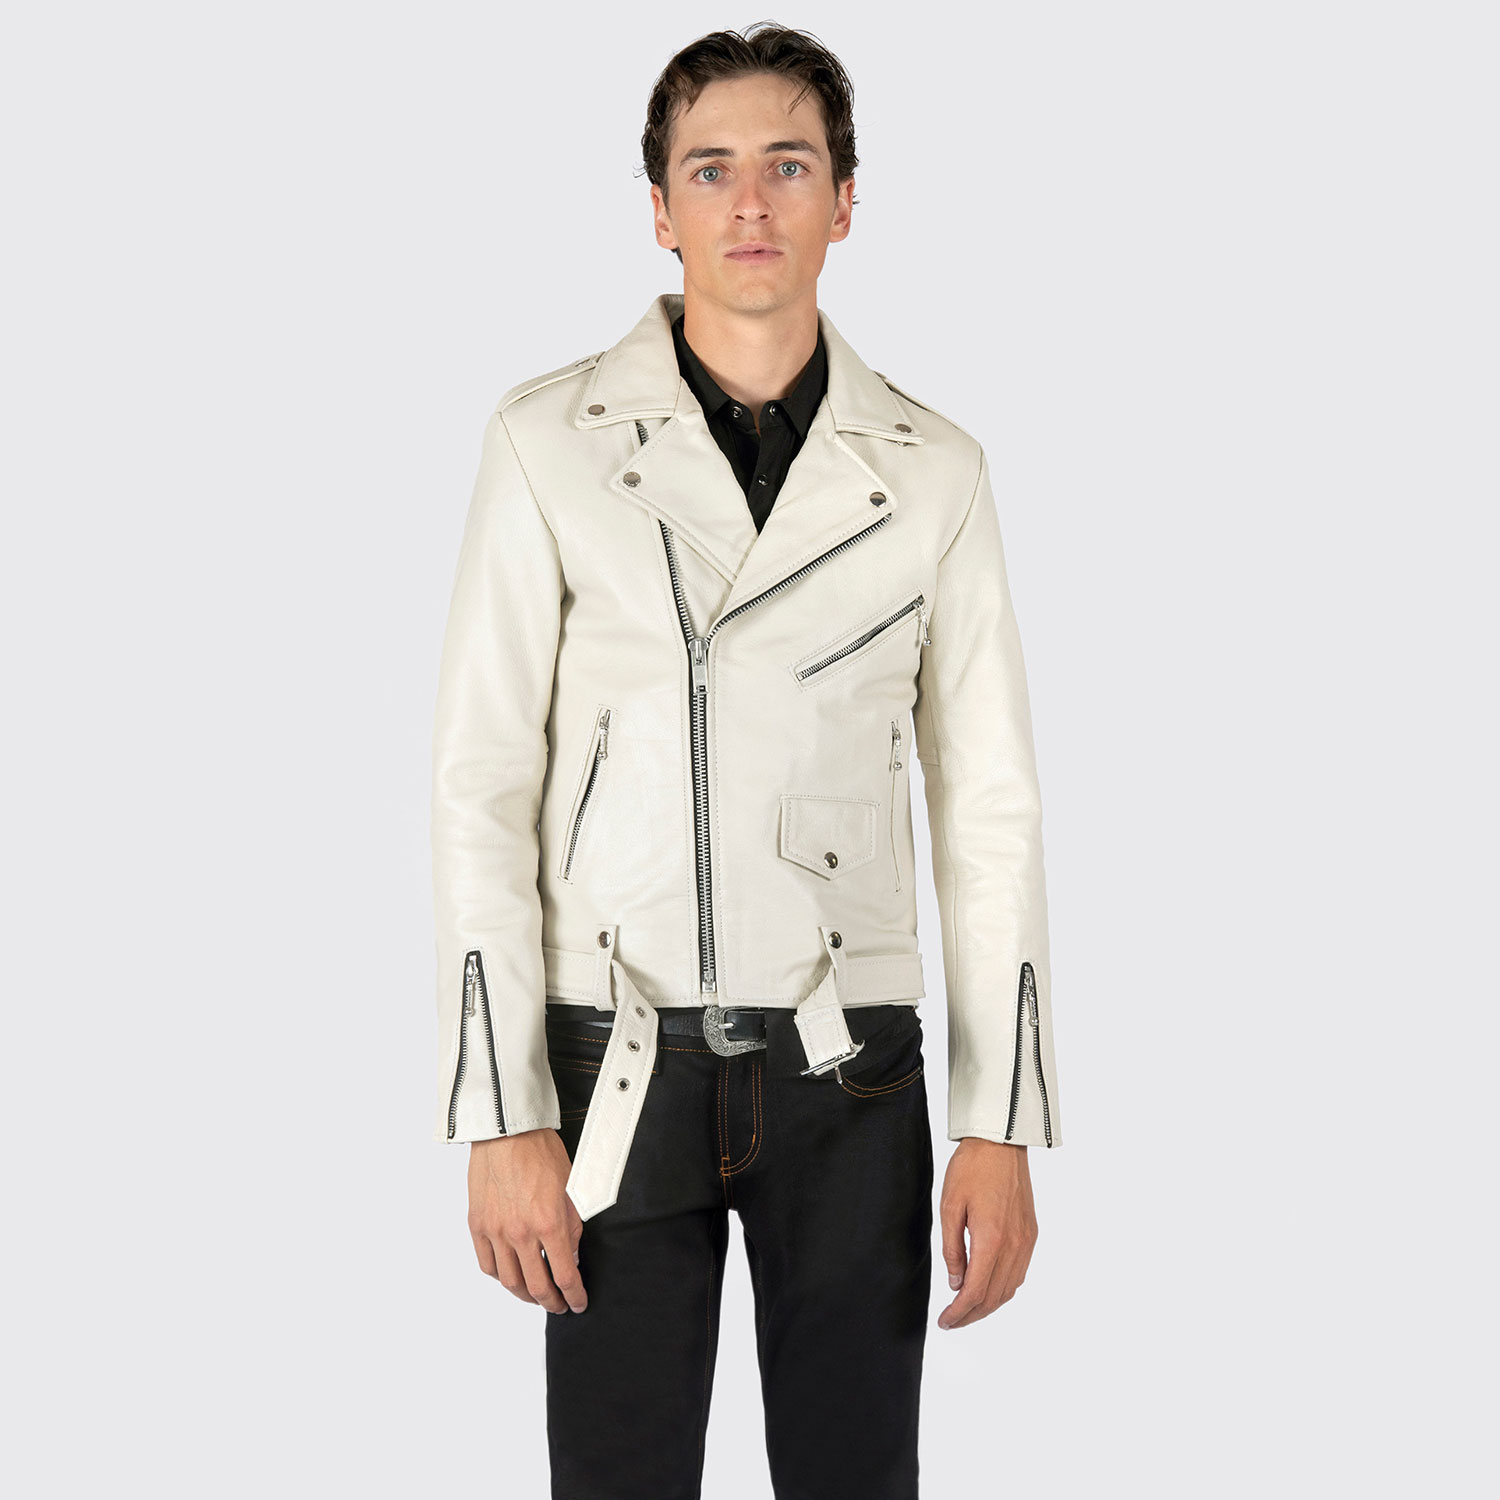 White, Navy and Leather Jacket - THE STYLING DUTCHMAN.